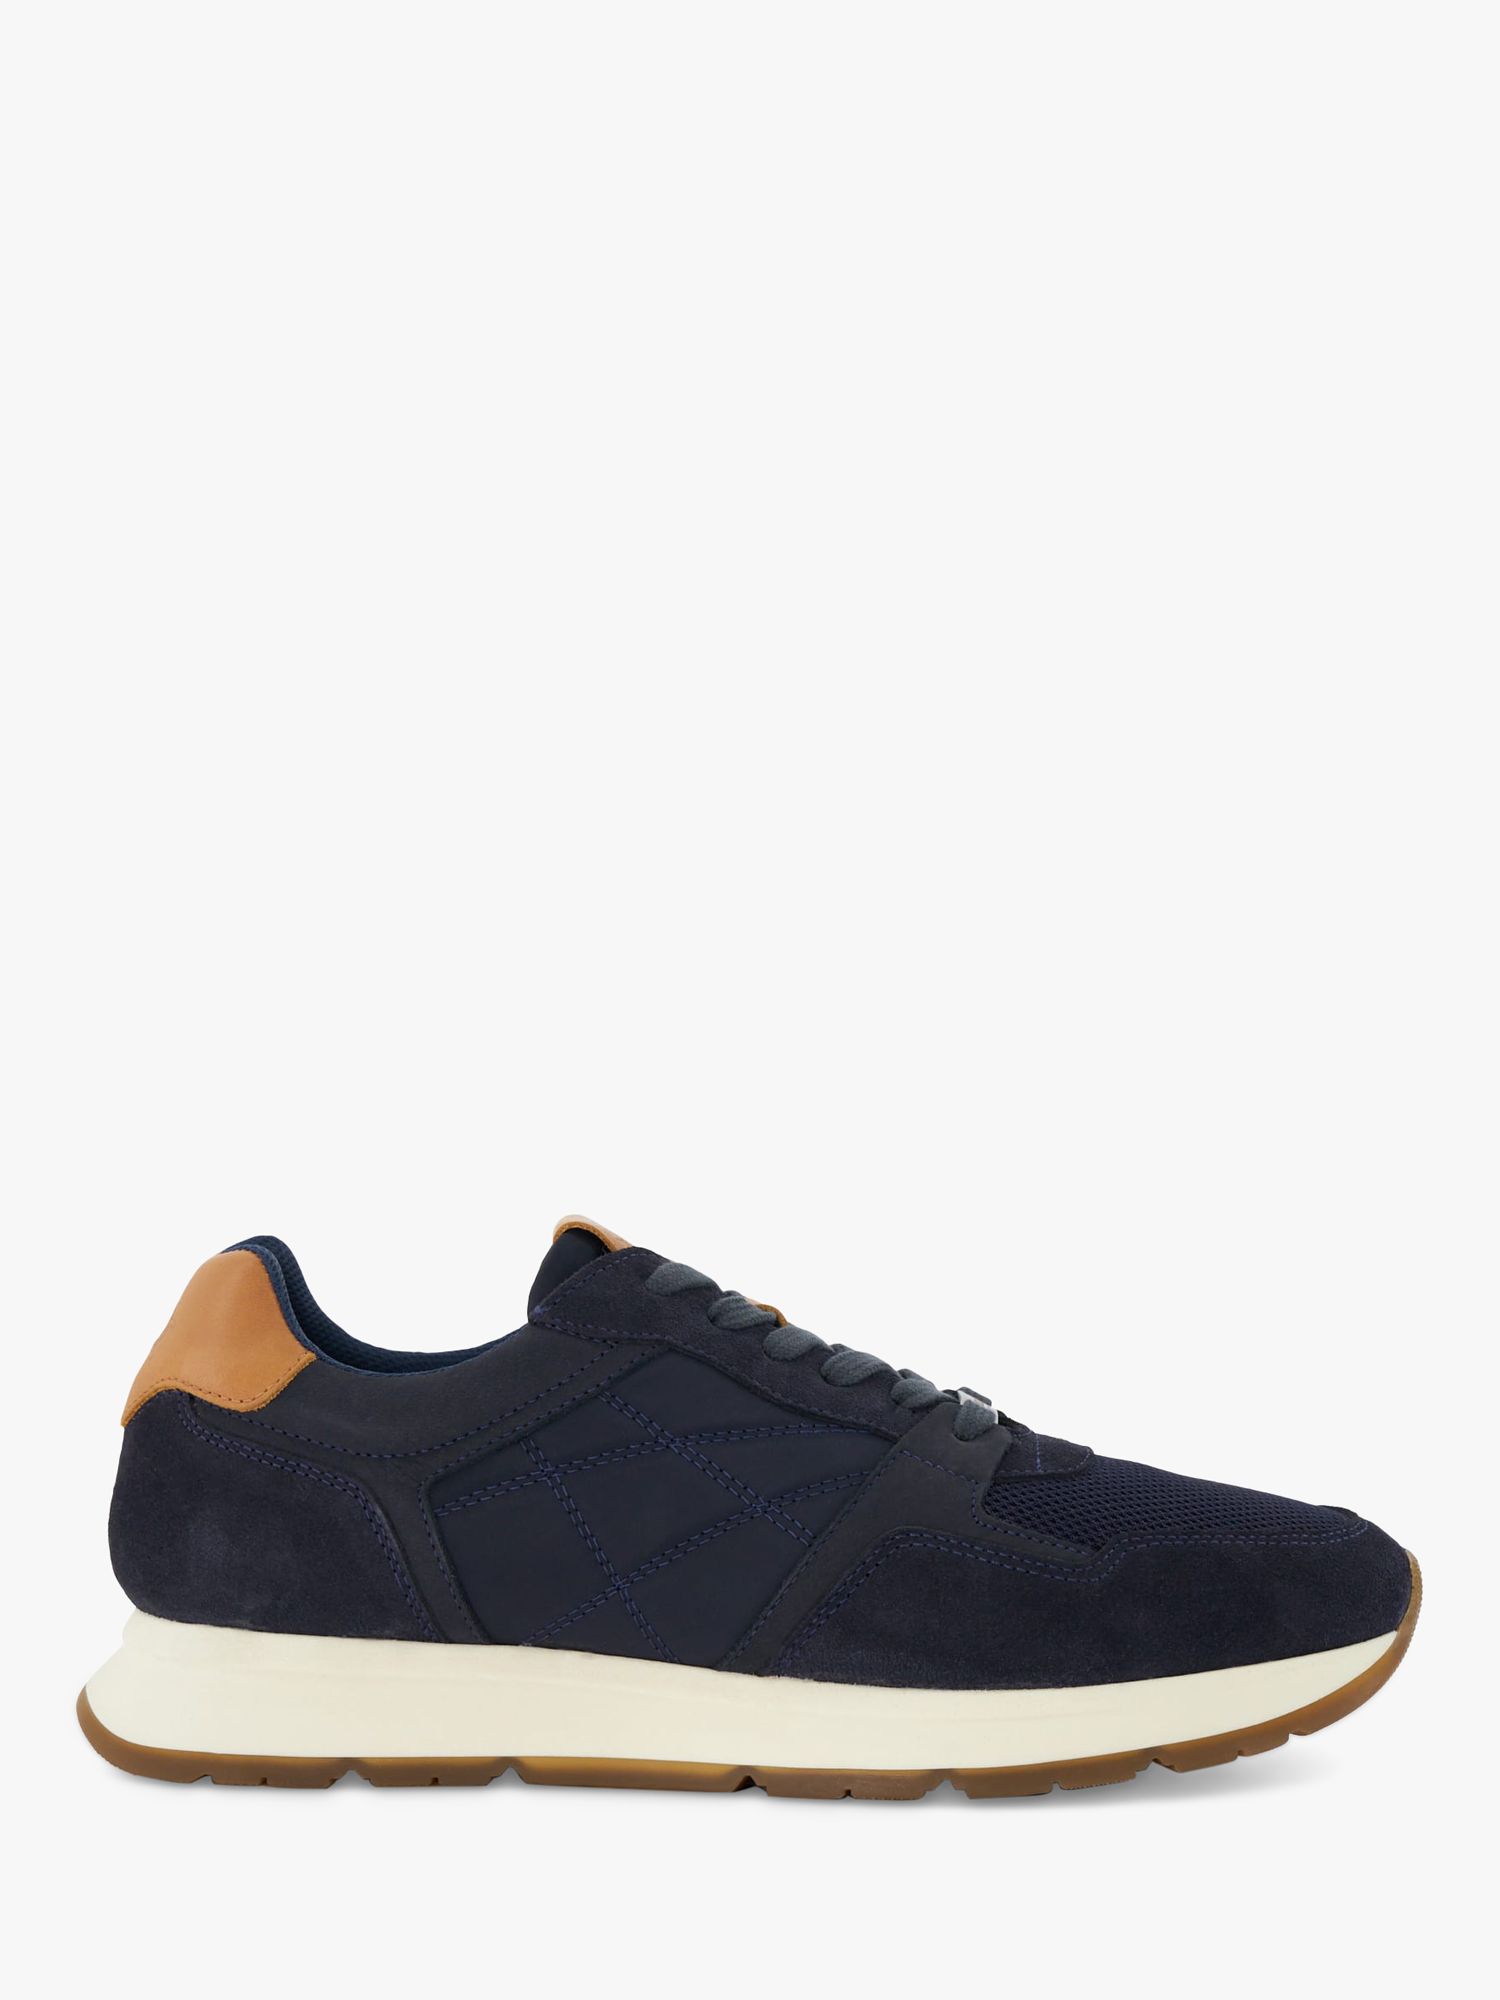 Dune Tangent Suede Trainers, Navy/Brown at John Lewis & Partners